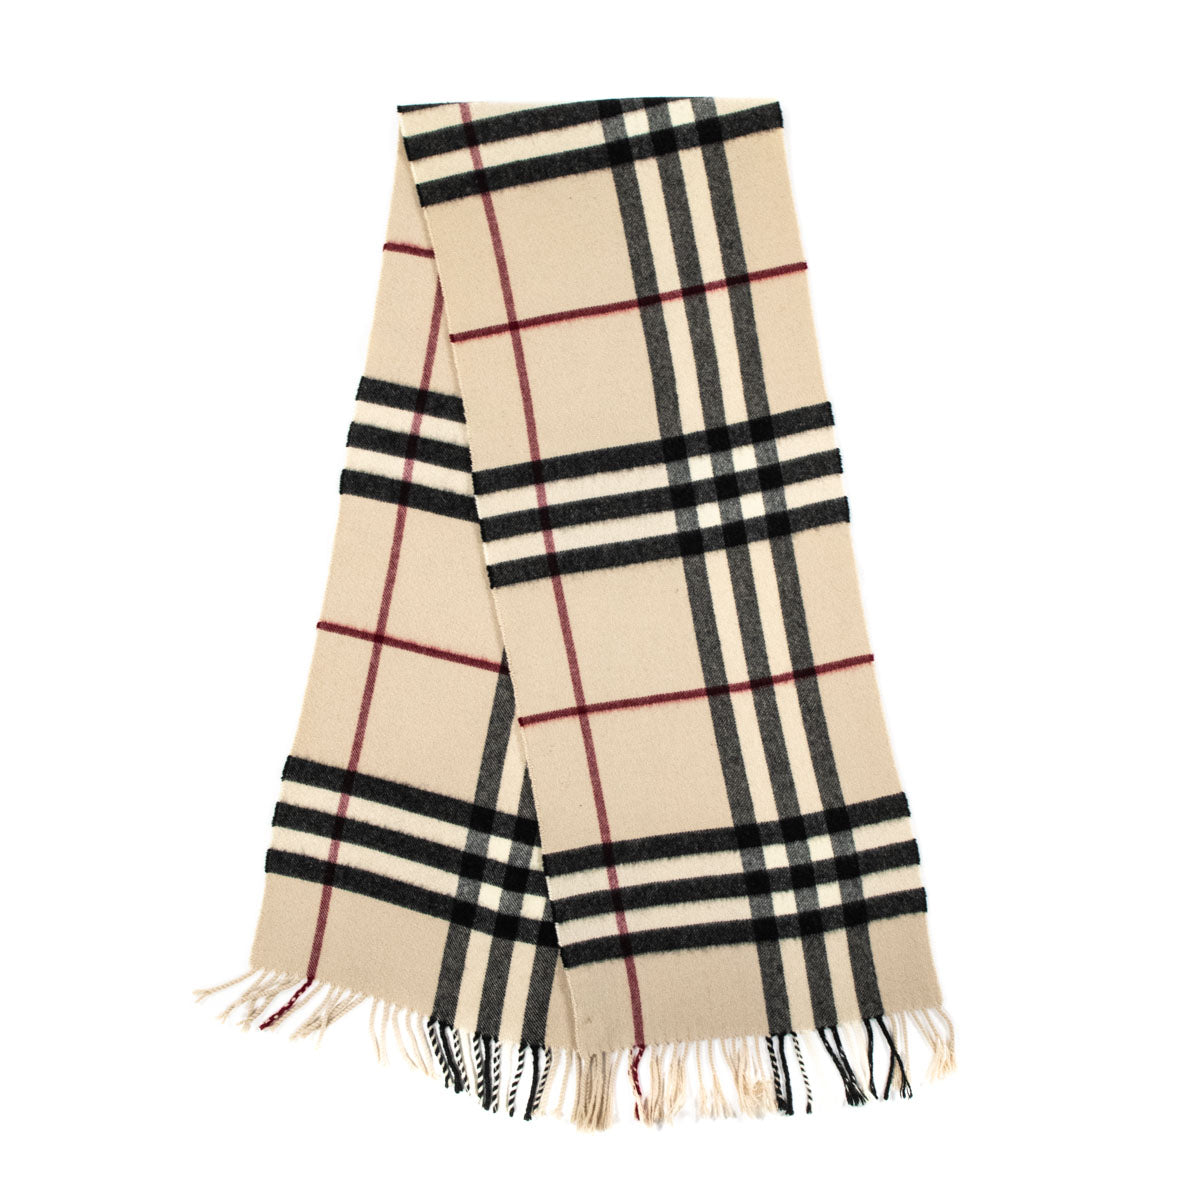 Burberry Check Cashmere Scarf - Shop Authentic Burberry Scarves